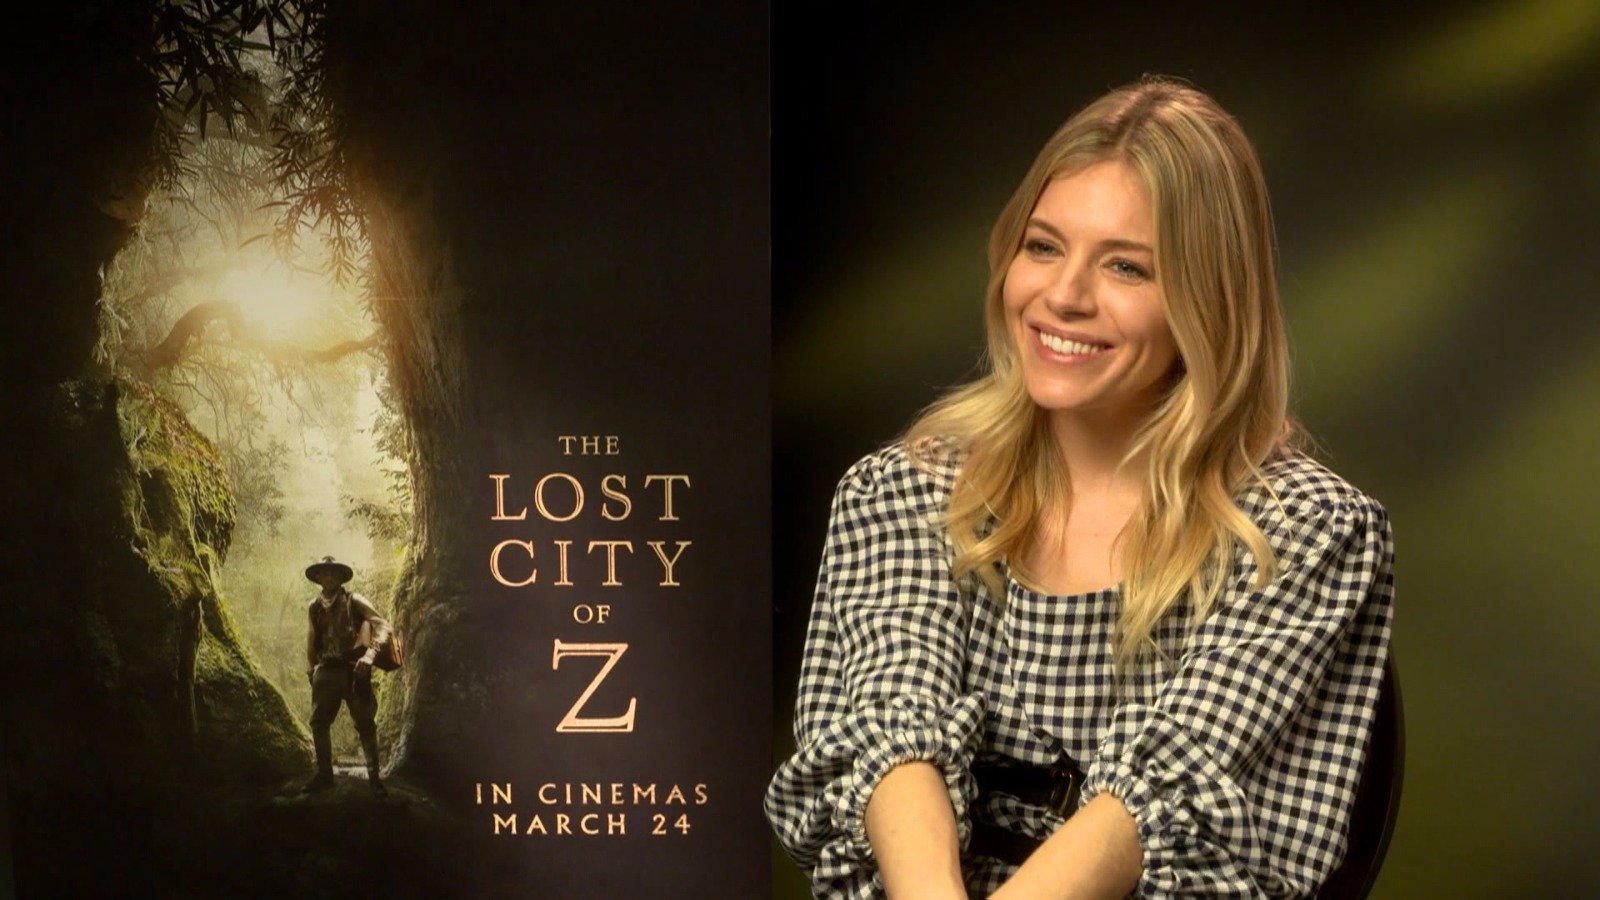 The Lost City of Z. Sienna Miller Interview. James Gray